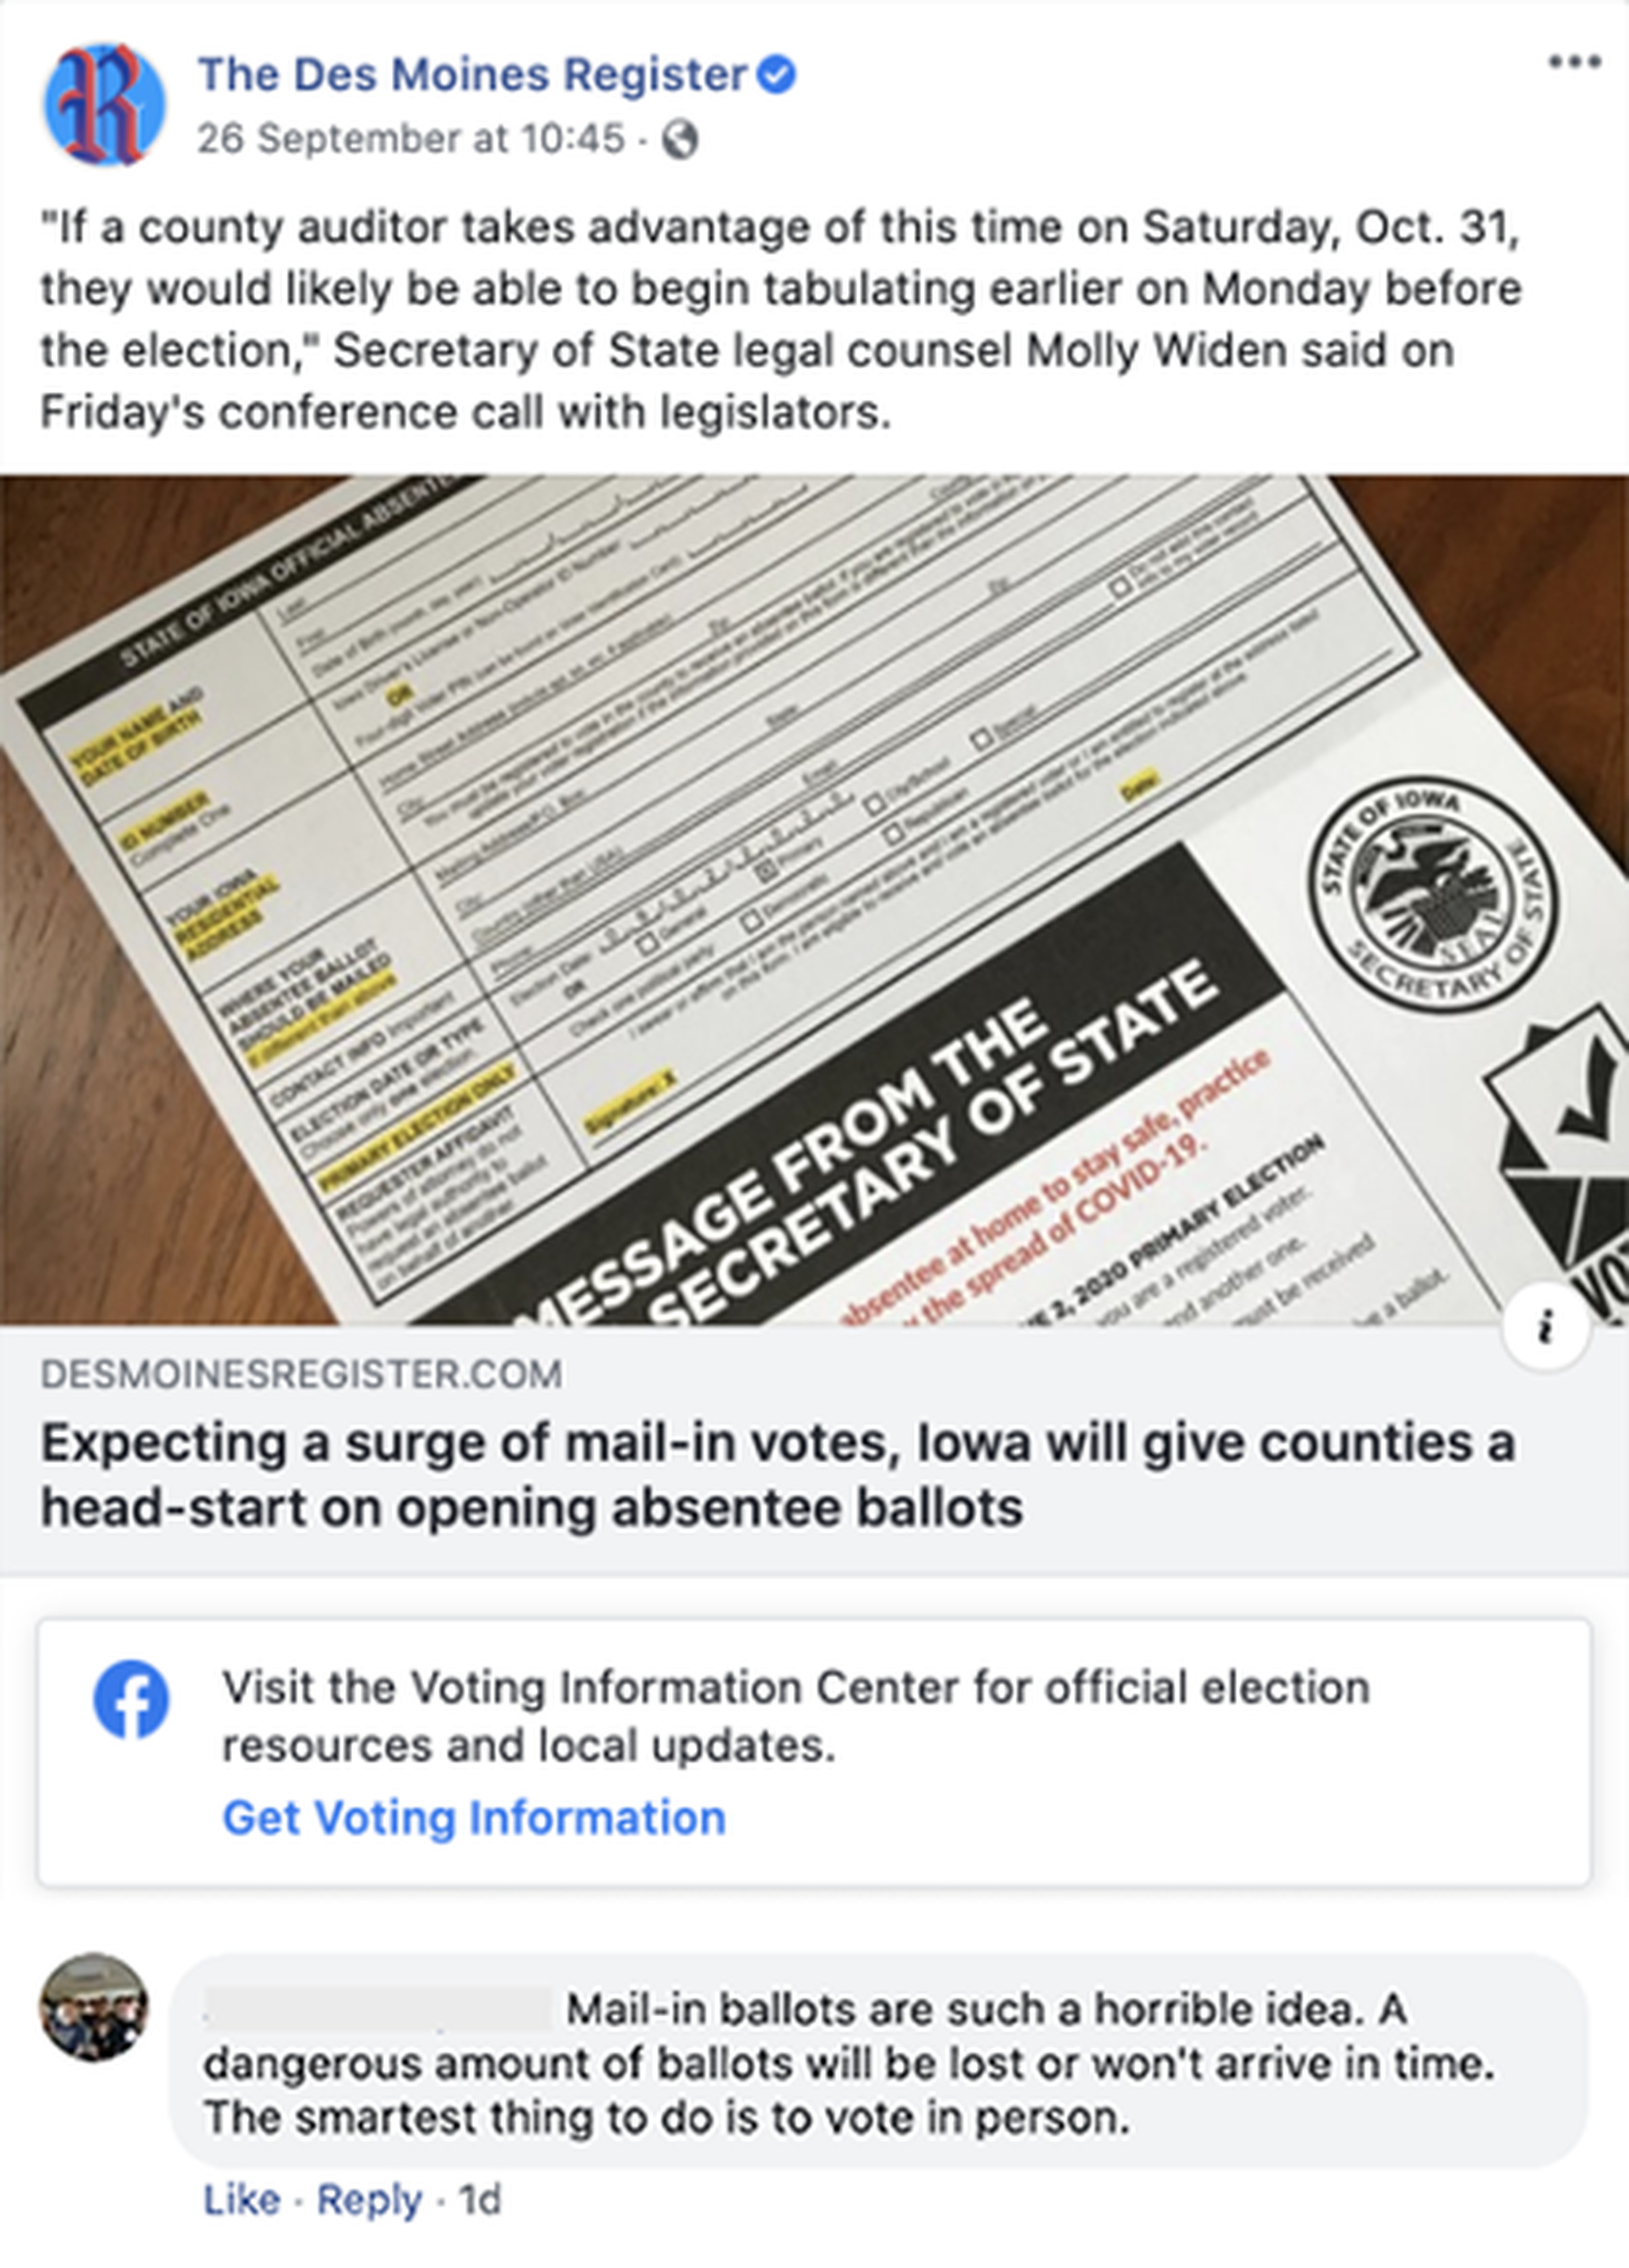 Des Moines Register article posted on Facebook with a comment reading “Mail-in ballots are such a horrible idea. A dangerous amount of ballots will be lost or won’t arrive in time. The smartest thing to do is to vote in person.”